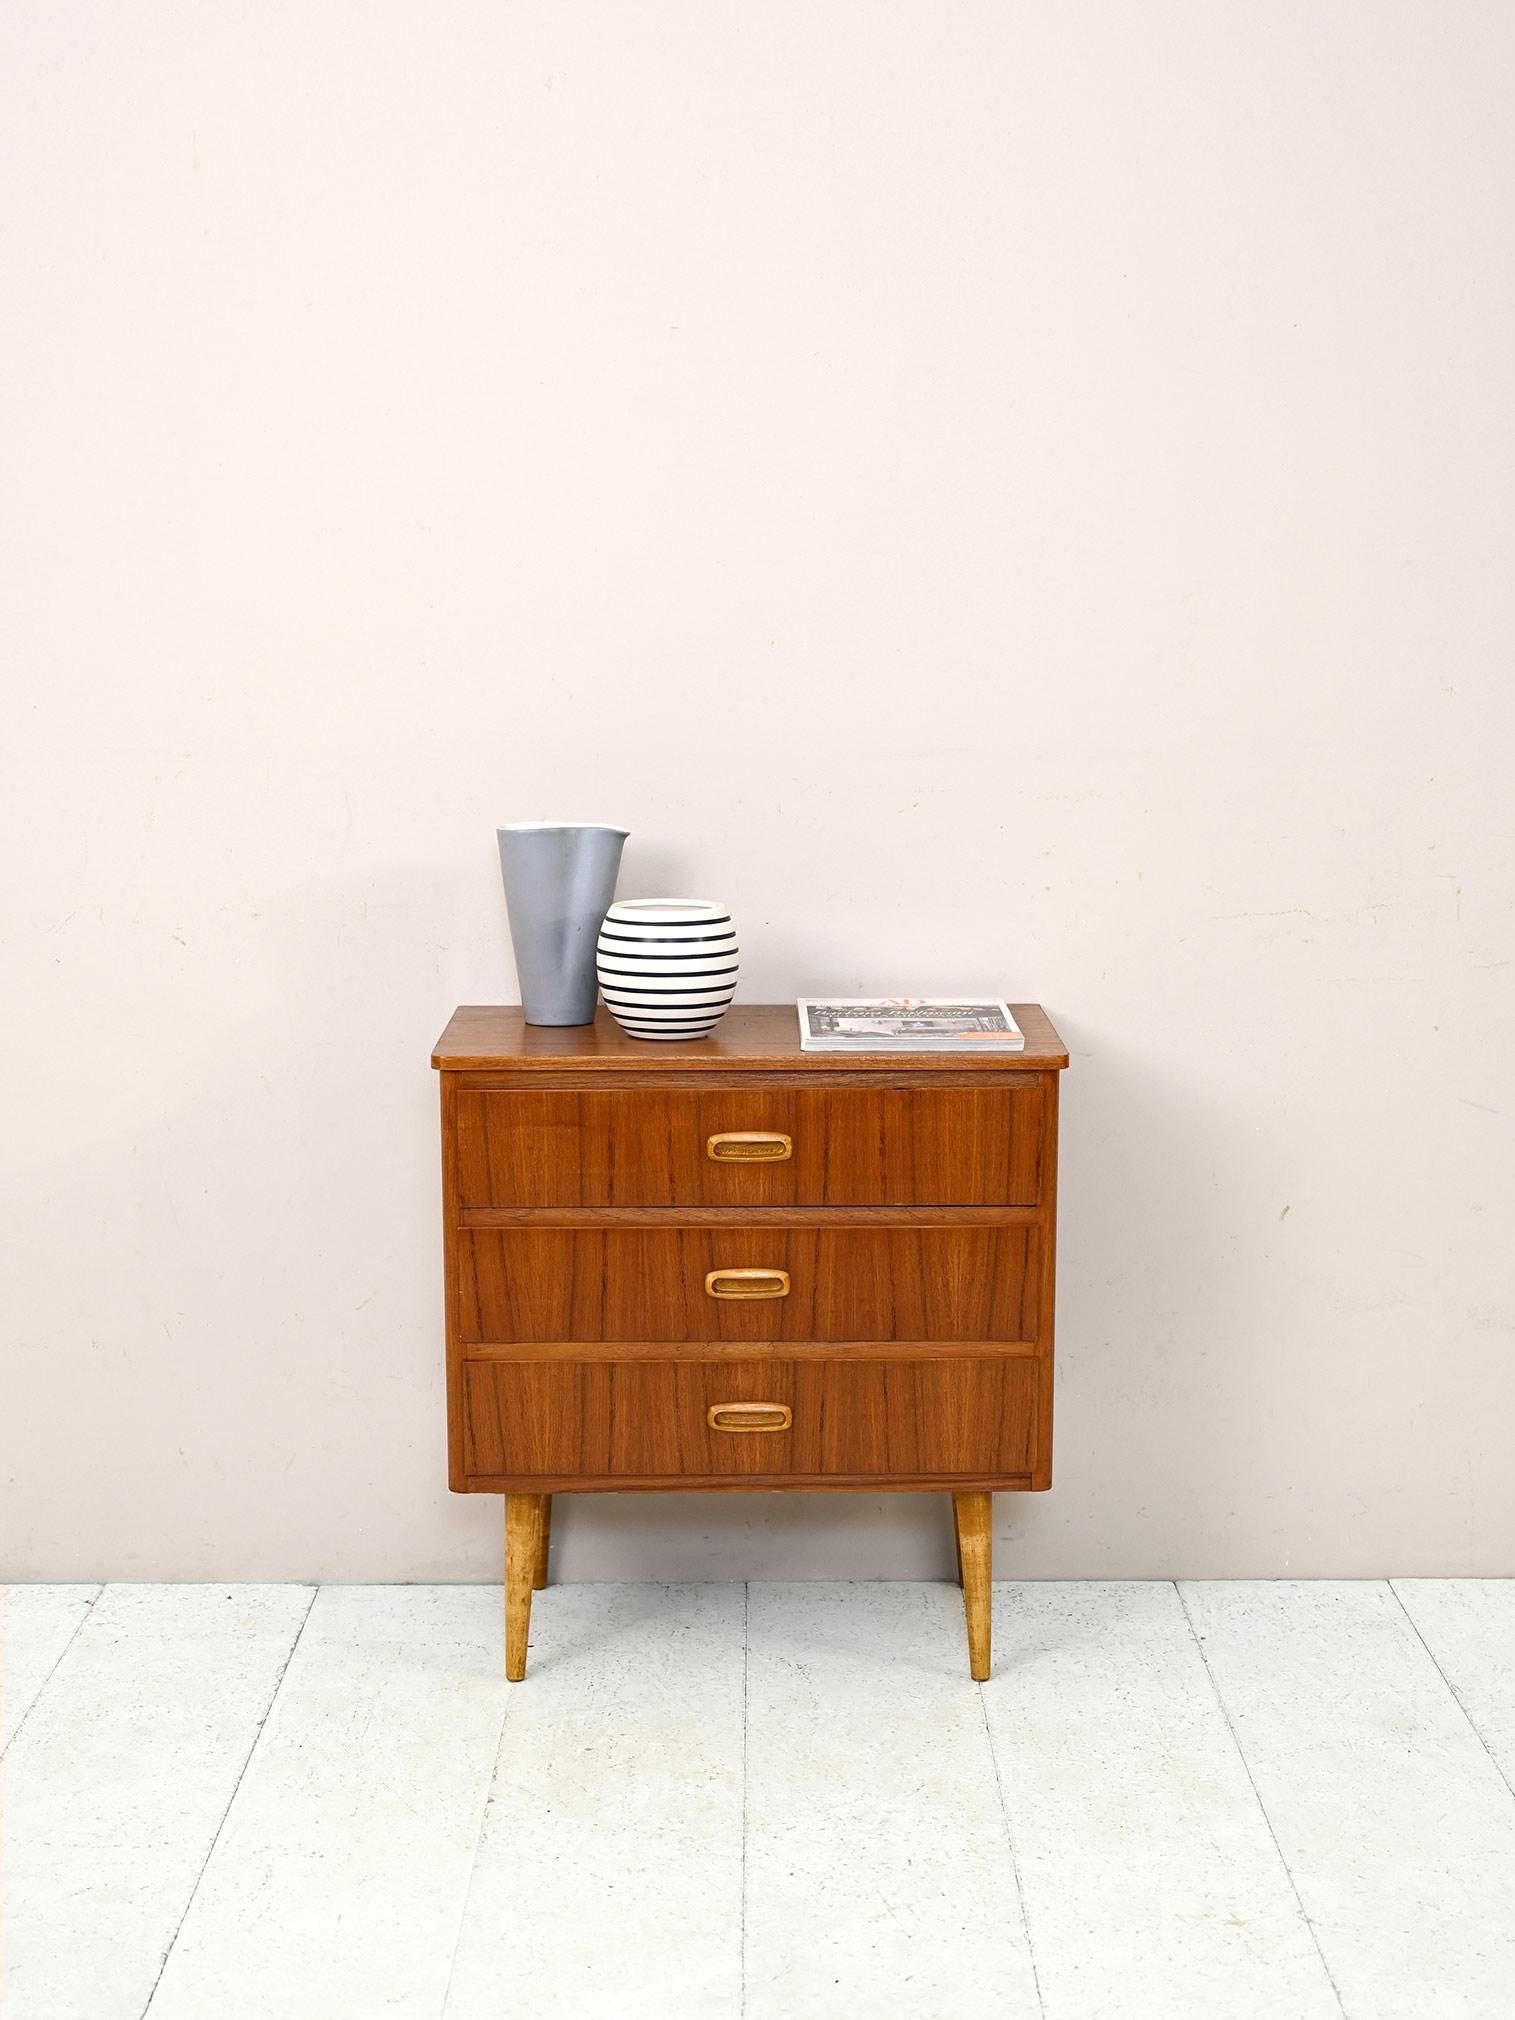 Swedish nightstand with three drawers.

A small chest of drawers, ideal for use as a nightstand or entryway cabinet.
The tapered legs and wood-carved drawer handles are distinctive features that harken back to mid-century Scandinavian